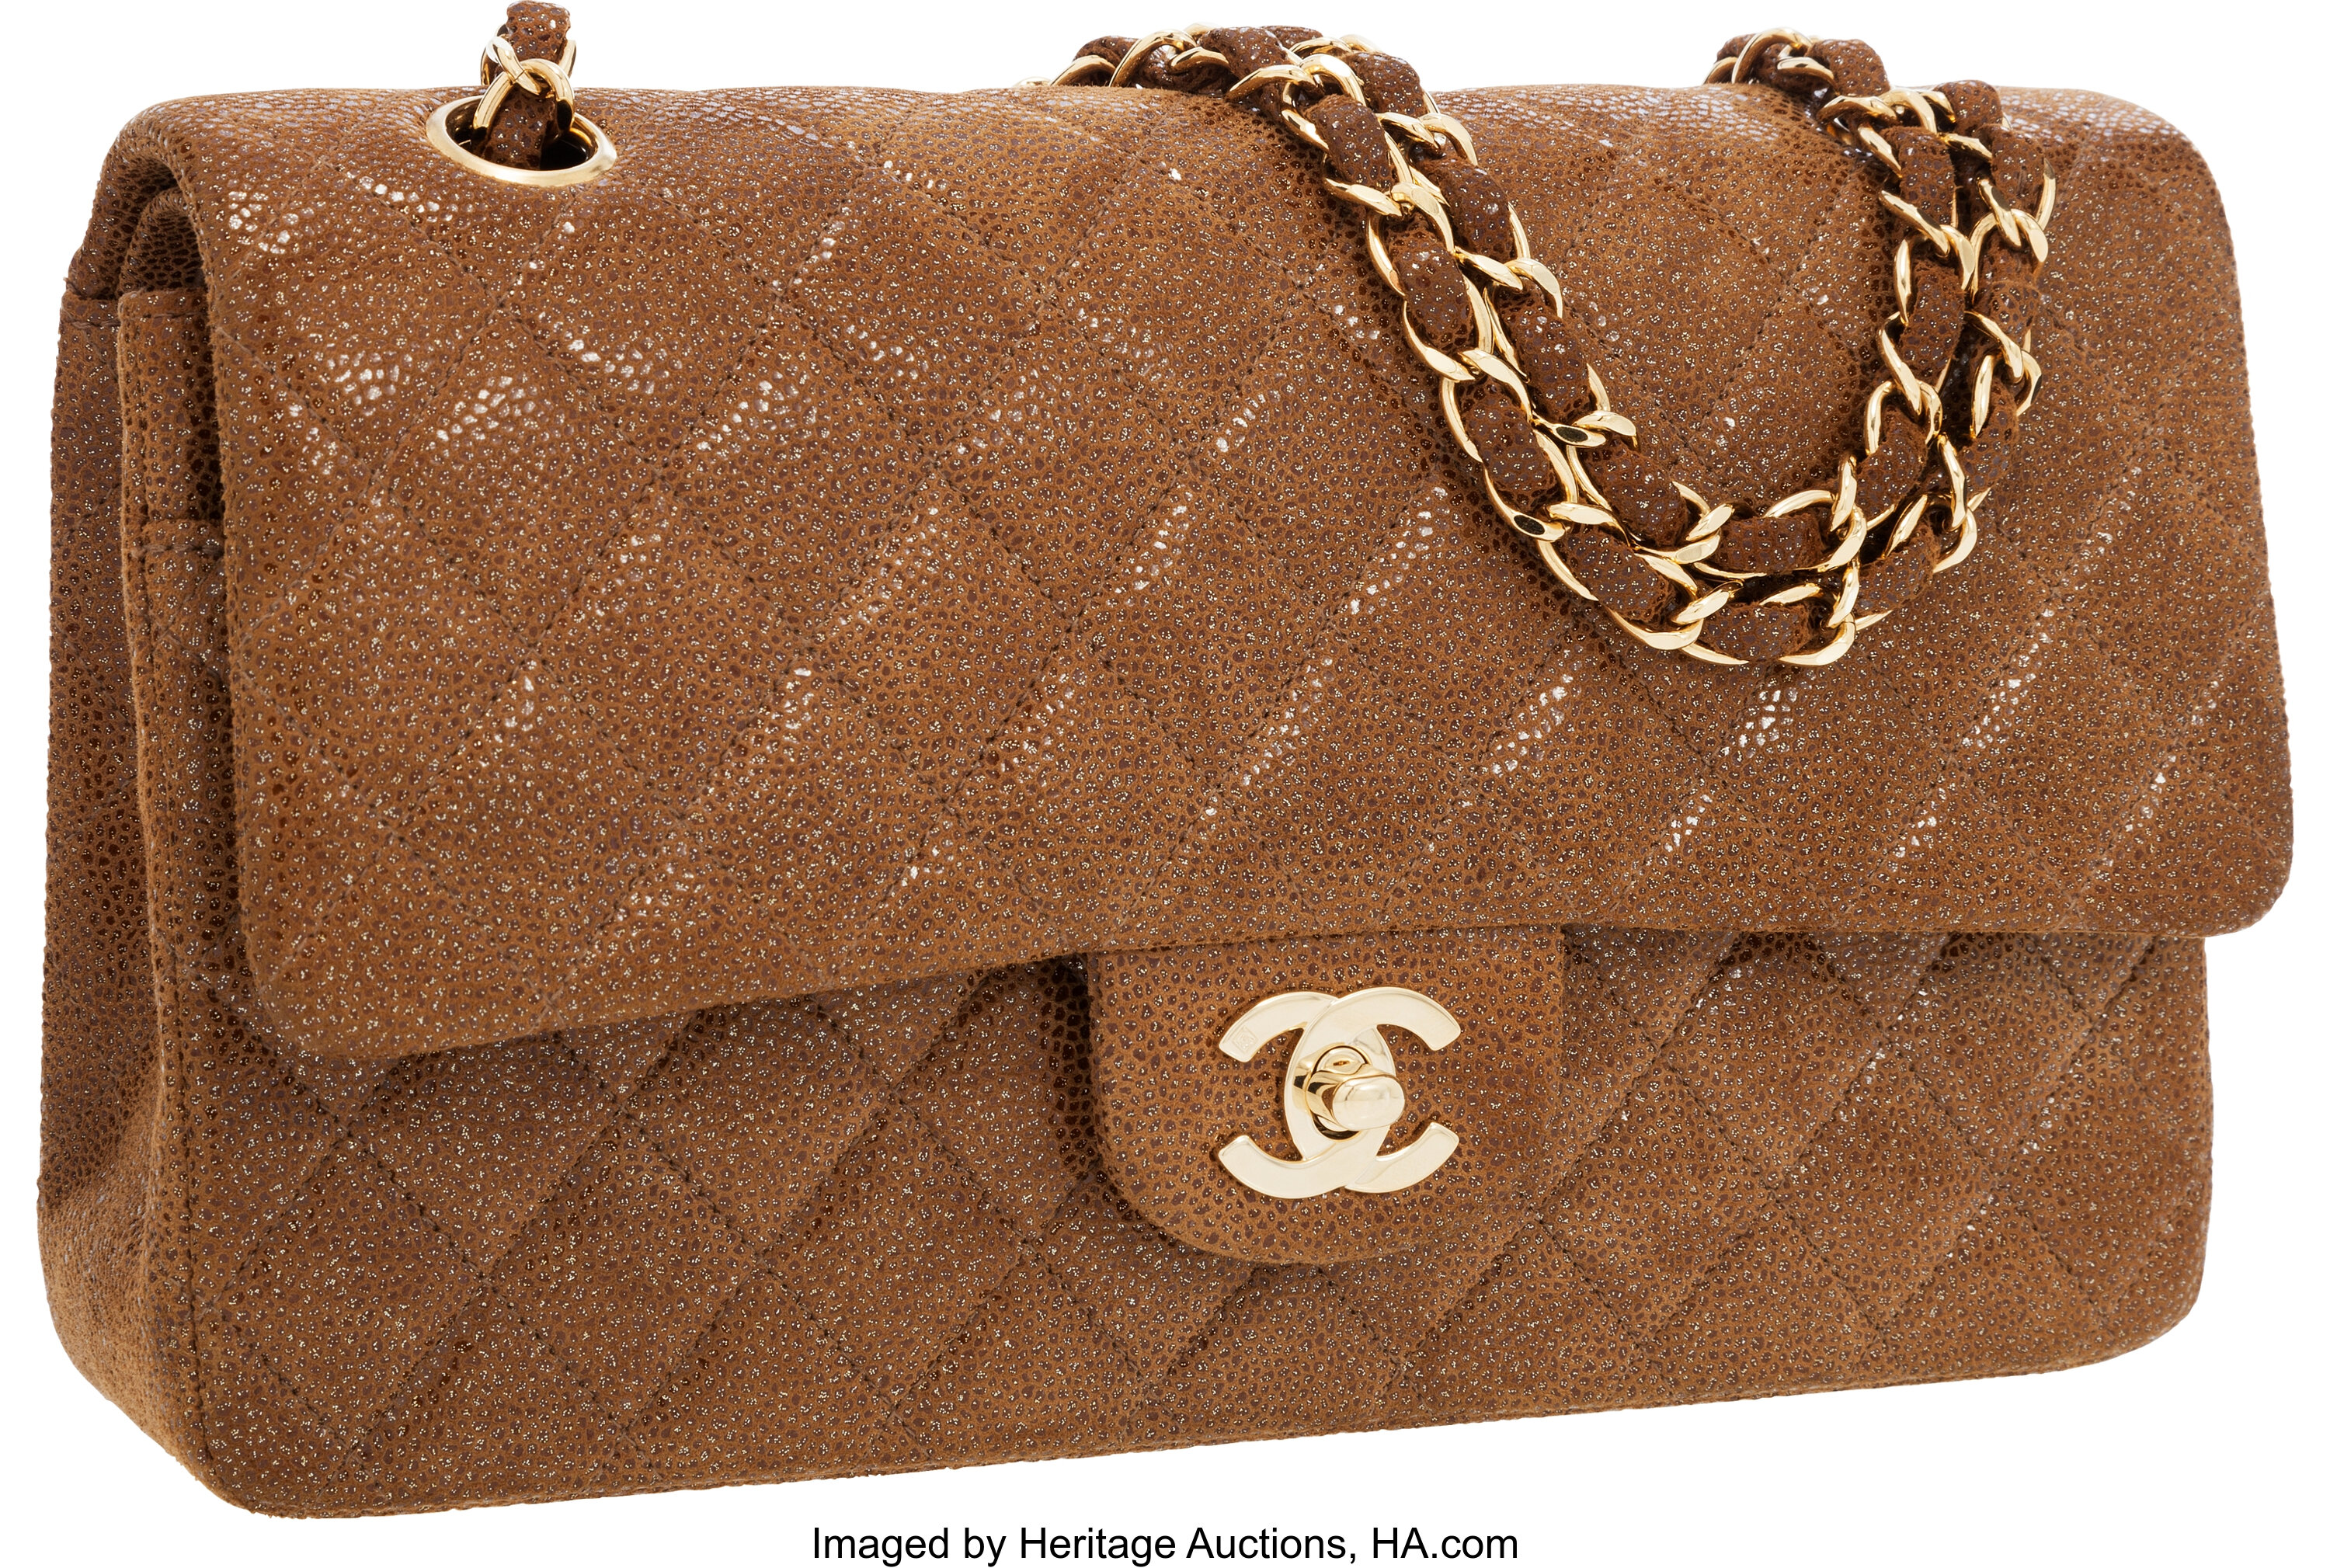 Chanel Light Brown Leather and Wooden Handle Bag.  Luxury